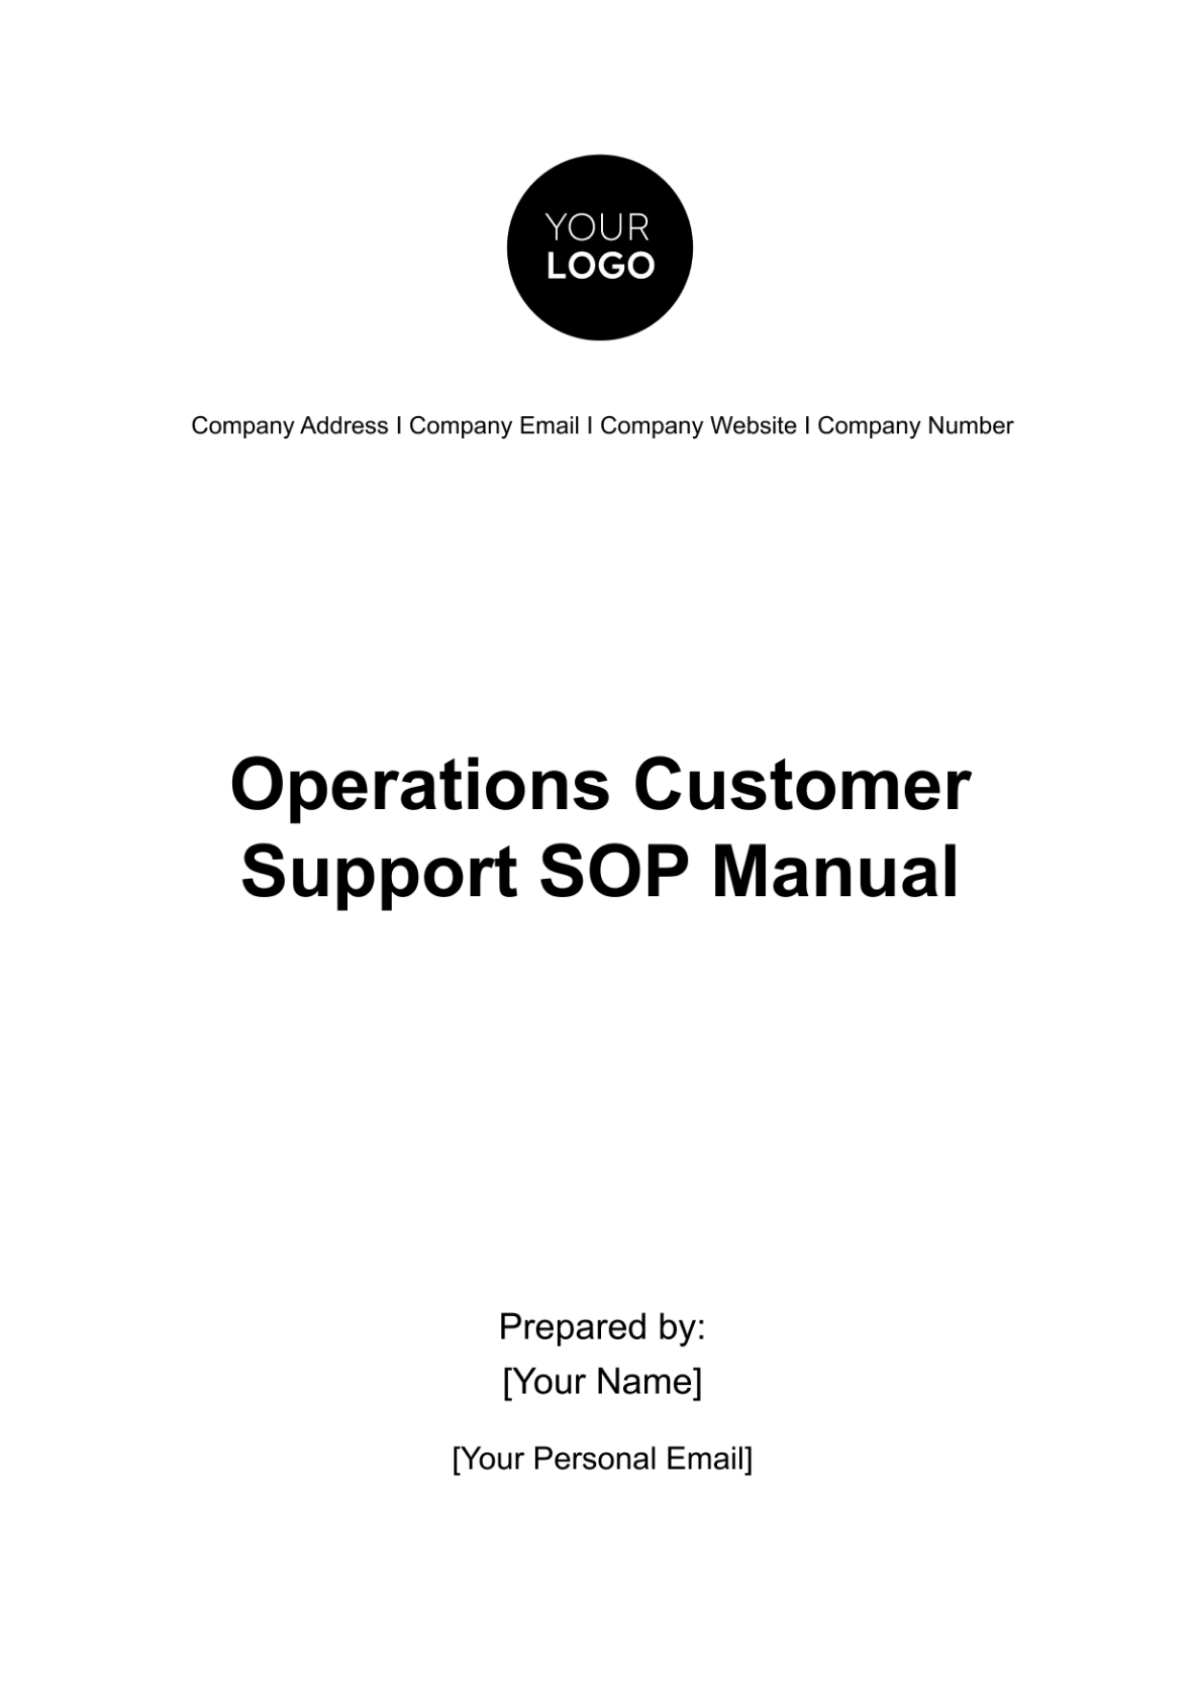 Operations Customer Support SOP Manual Template